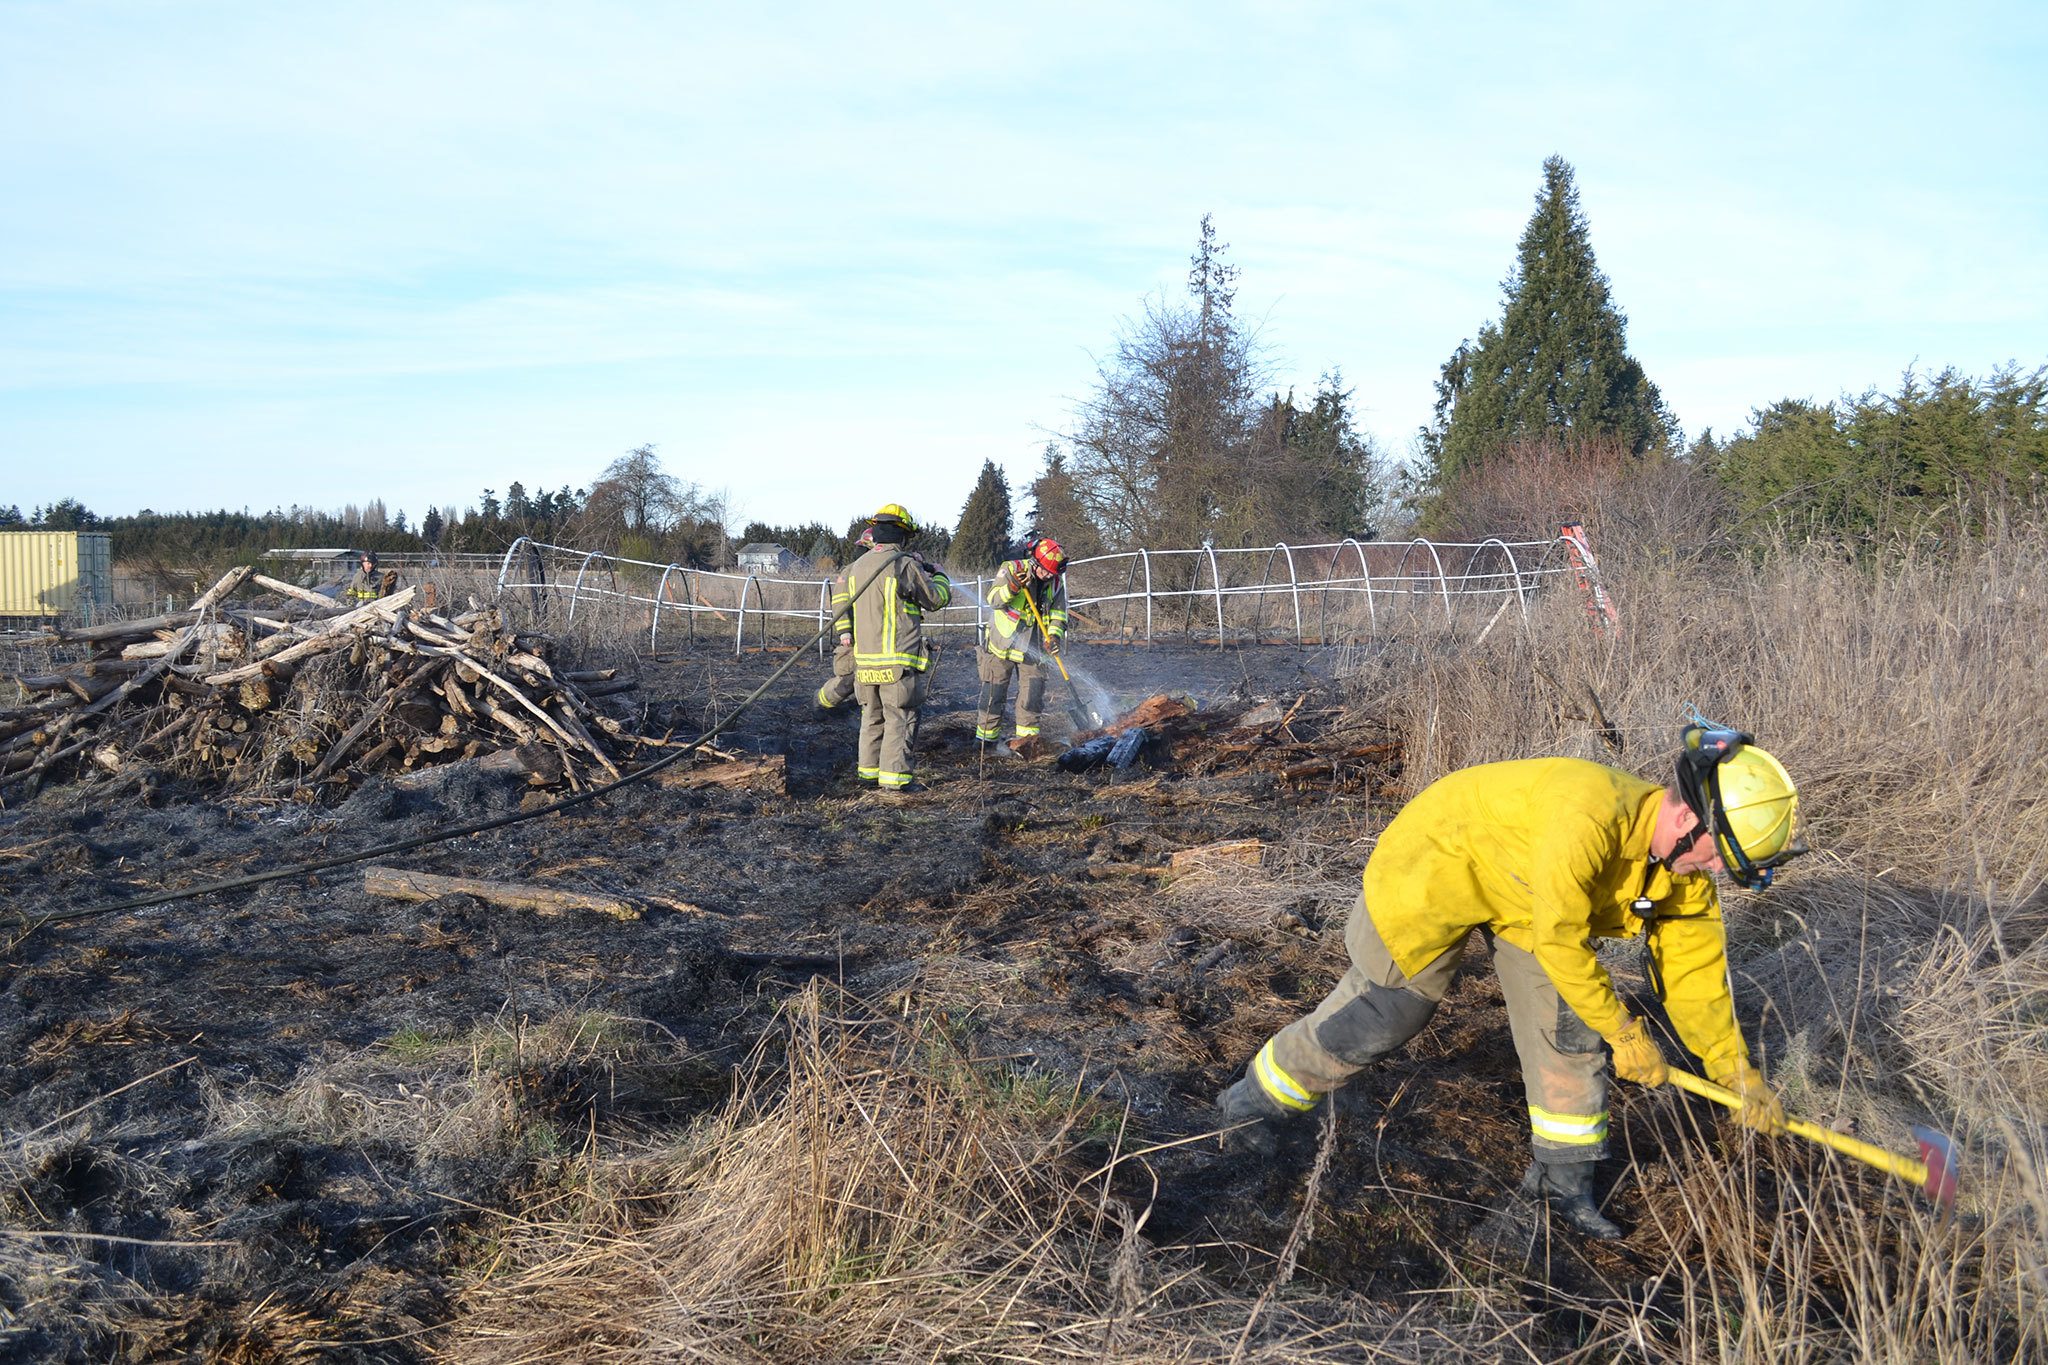 Clallam County Fire District 3 responded to a brush fire on Thursday, Feb. 2, in Carlsborg. Fire officials report the call came in at 3:13 p.m. for the fire at 201 Childers Lane, west of Sequim. Fire Chief Ben Andrews said the resident was burning outside and the wind picked up and spread the fire about 200 yards from the home’s backyard into a nearby field but avoiding a large brush pile. No animals or residents were harmed. Sequim Gazette photo by Matthew Nash